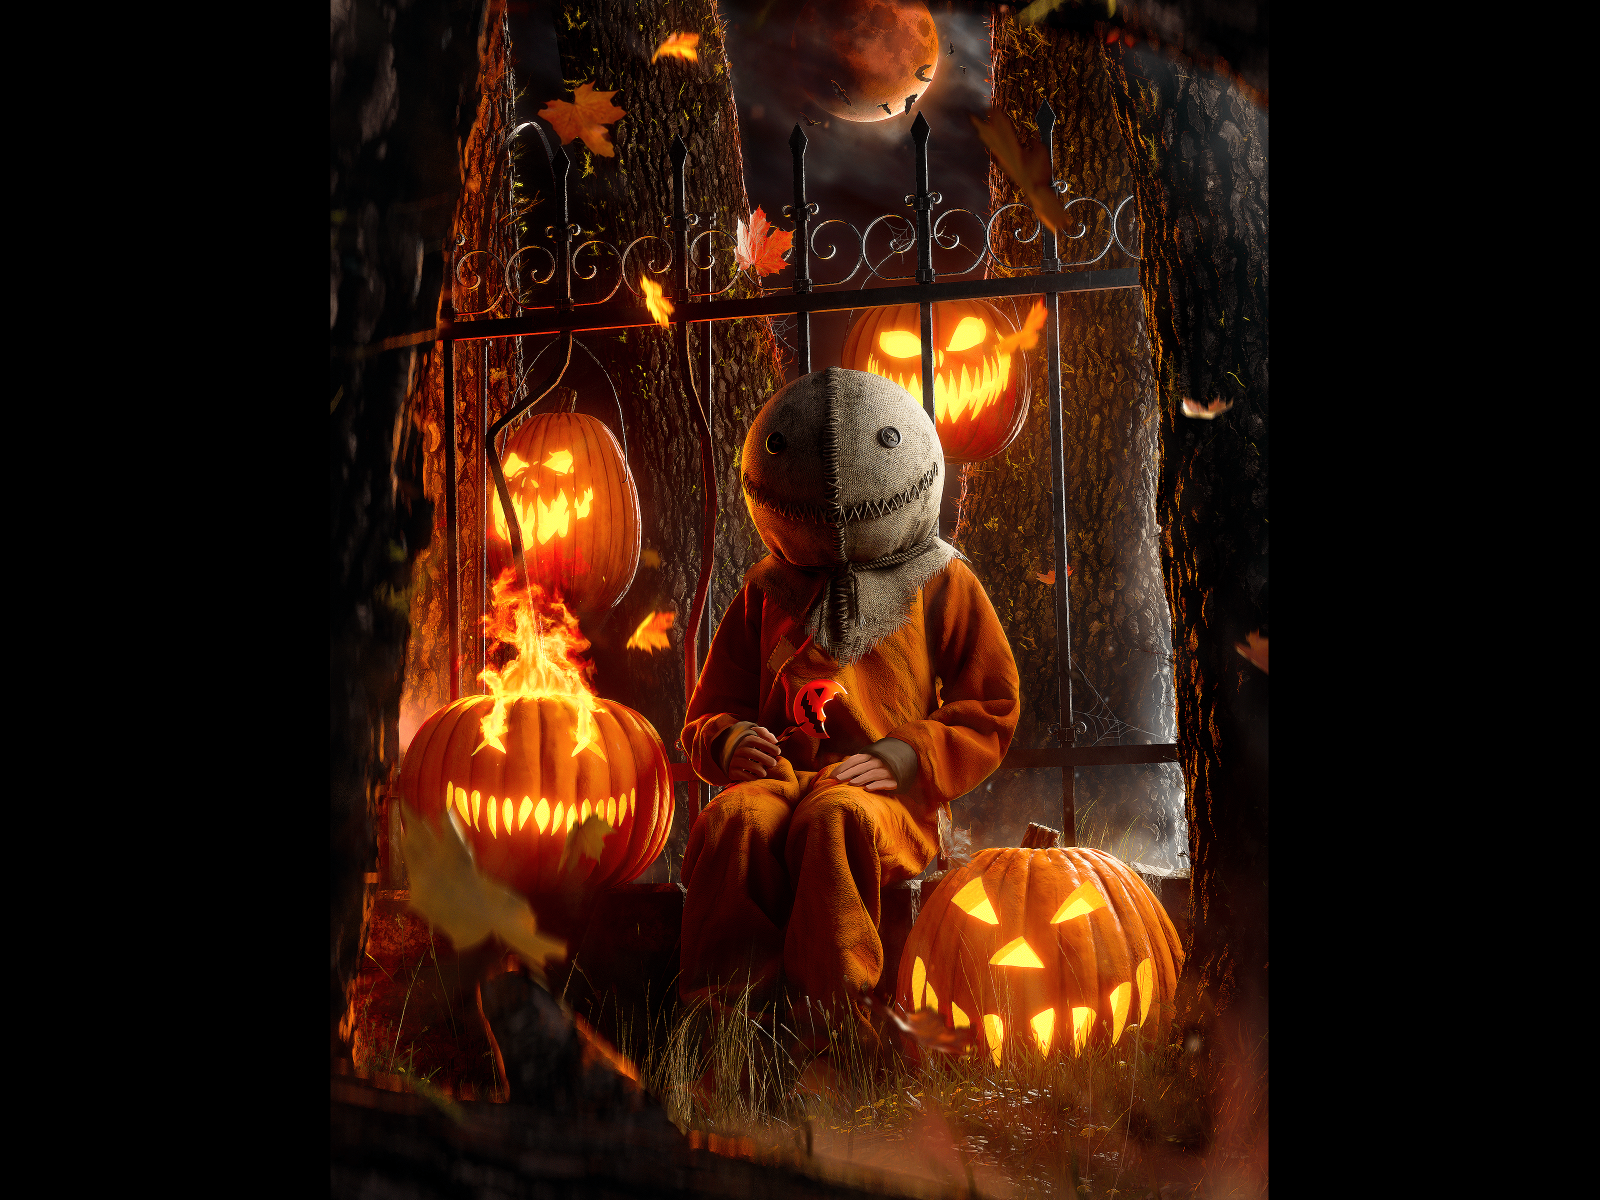 Trick 'r Treat by UNDEADDEATHS on Dribbble.